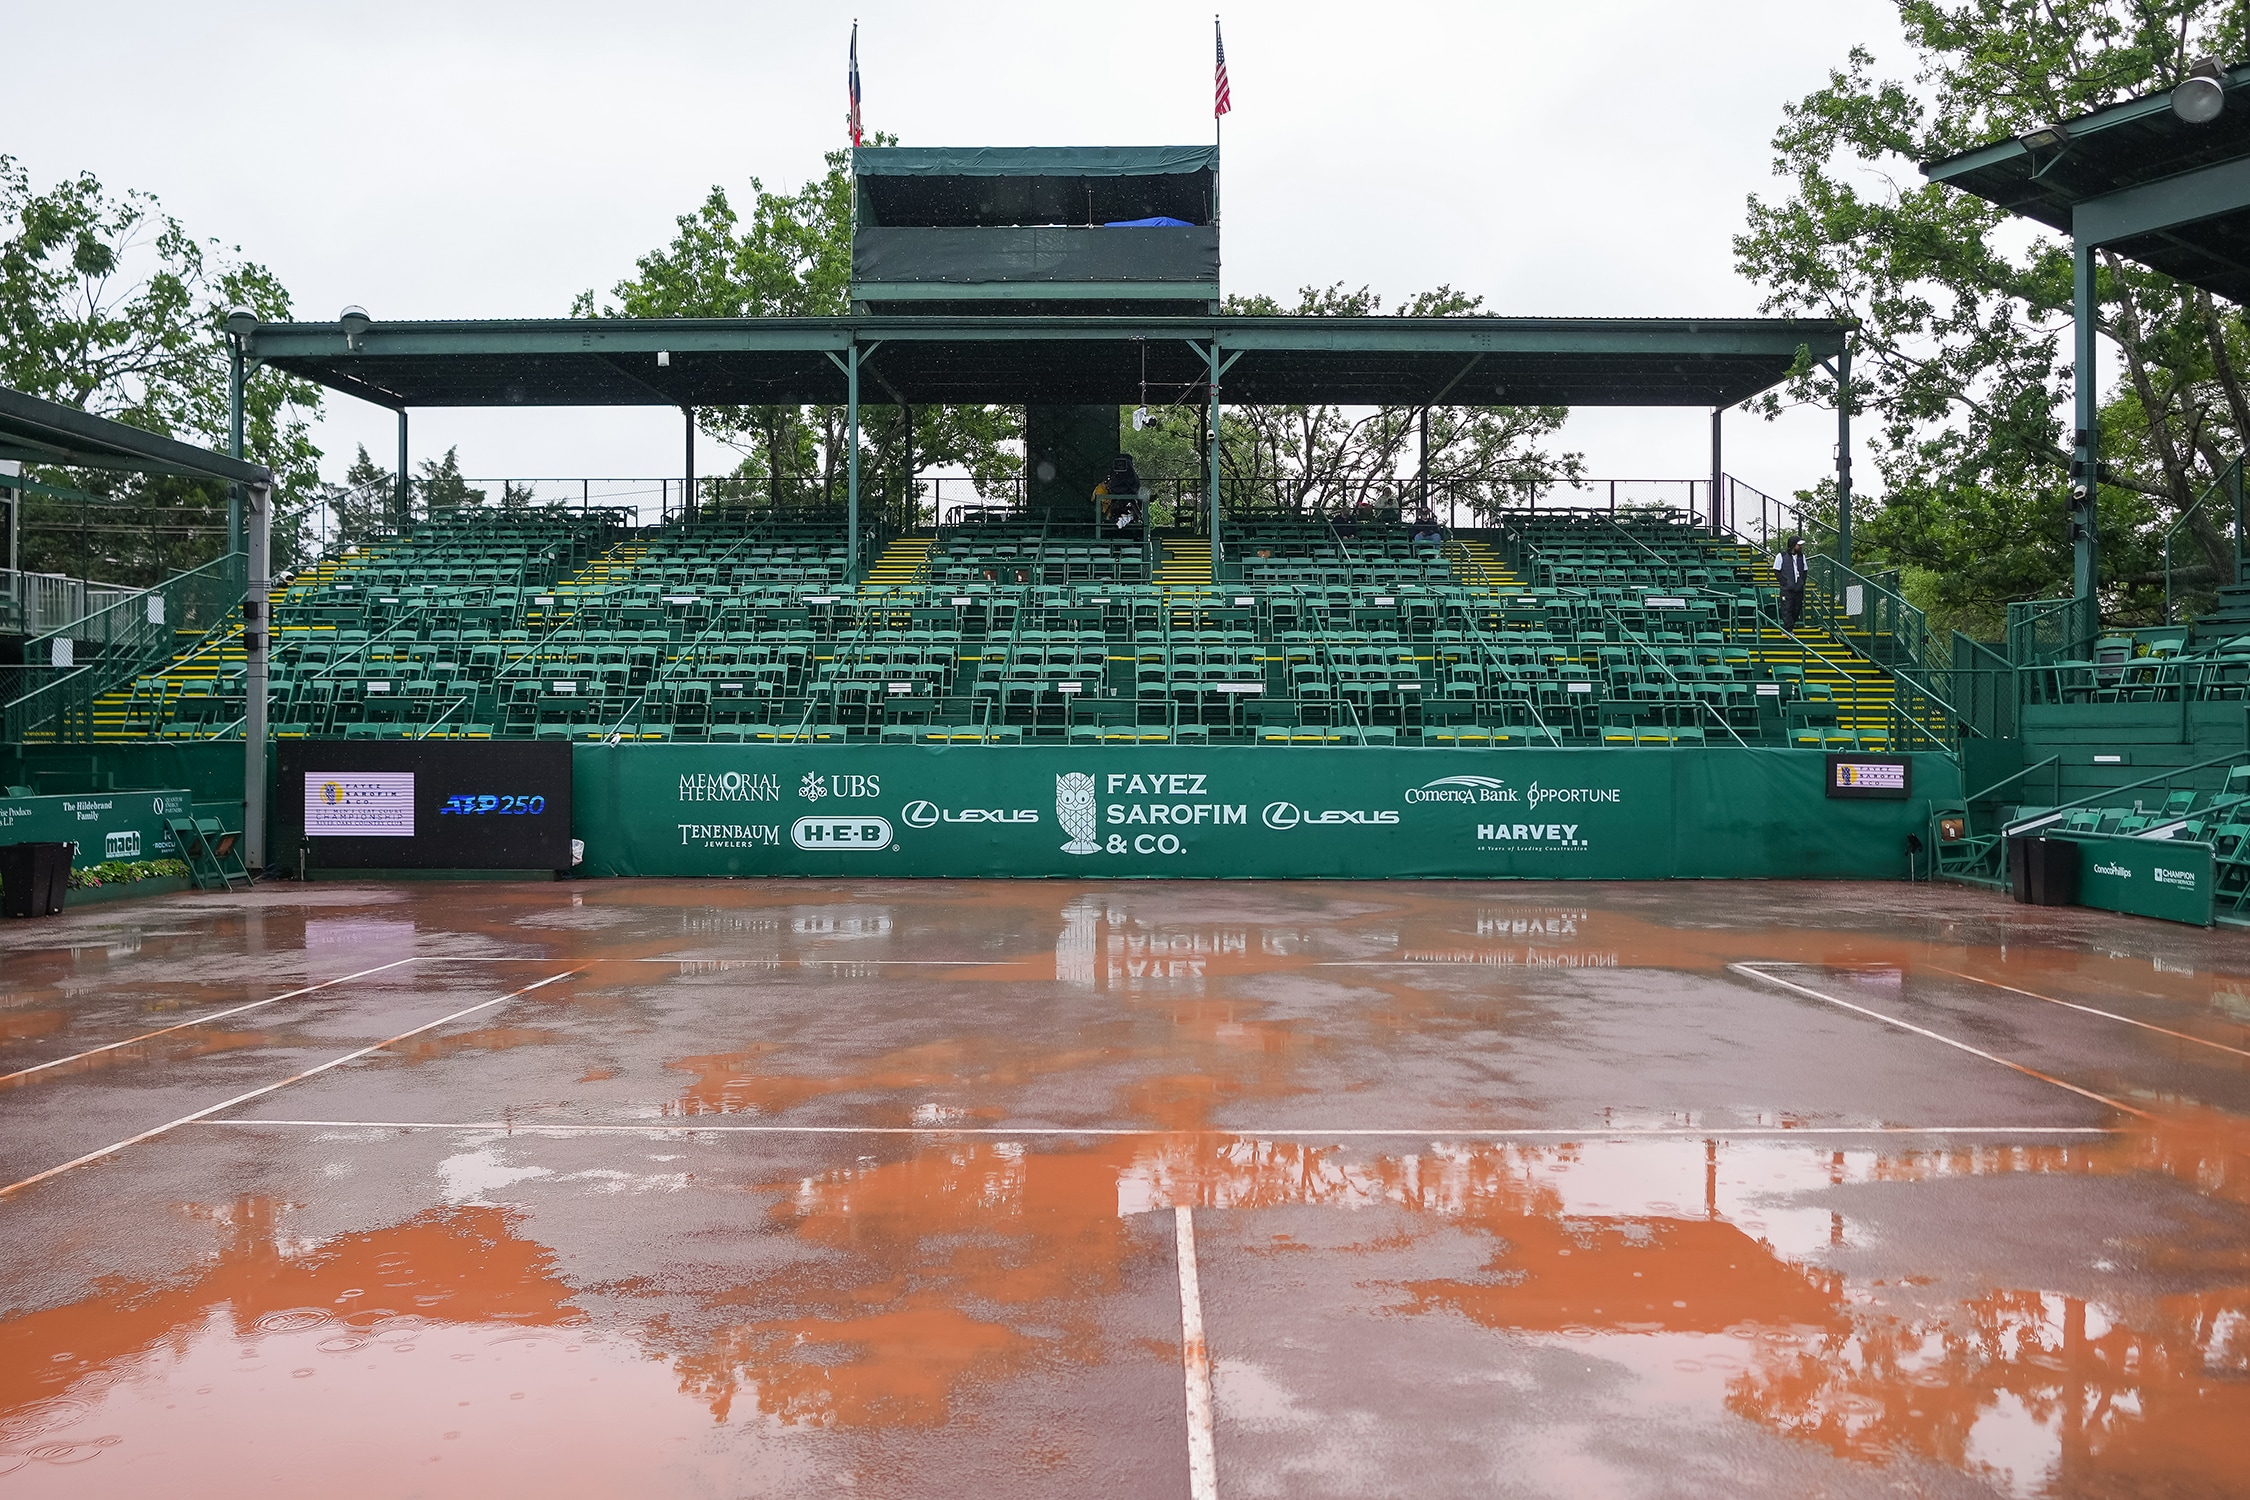 ATP Houston event faces muddy weekend after rain cancels play for third